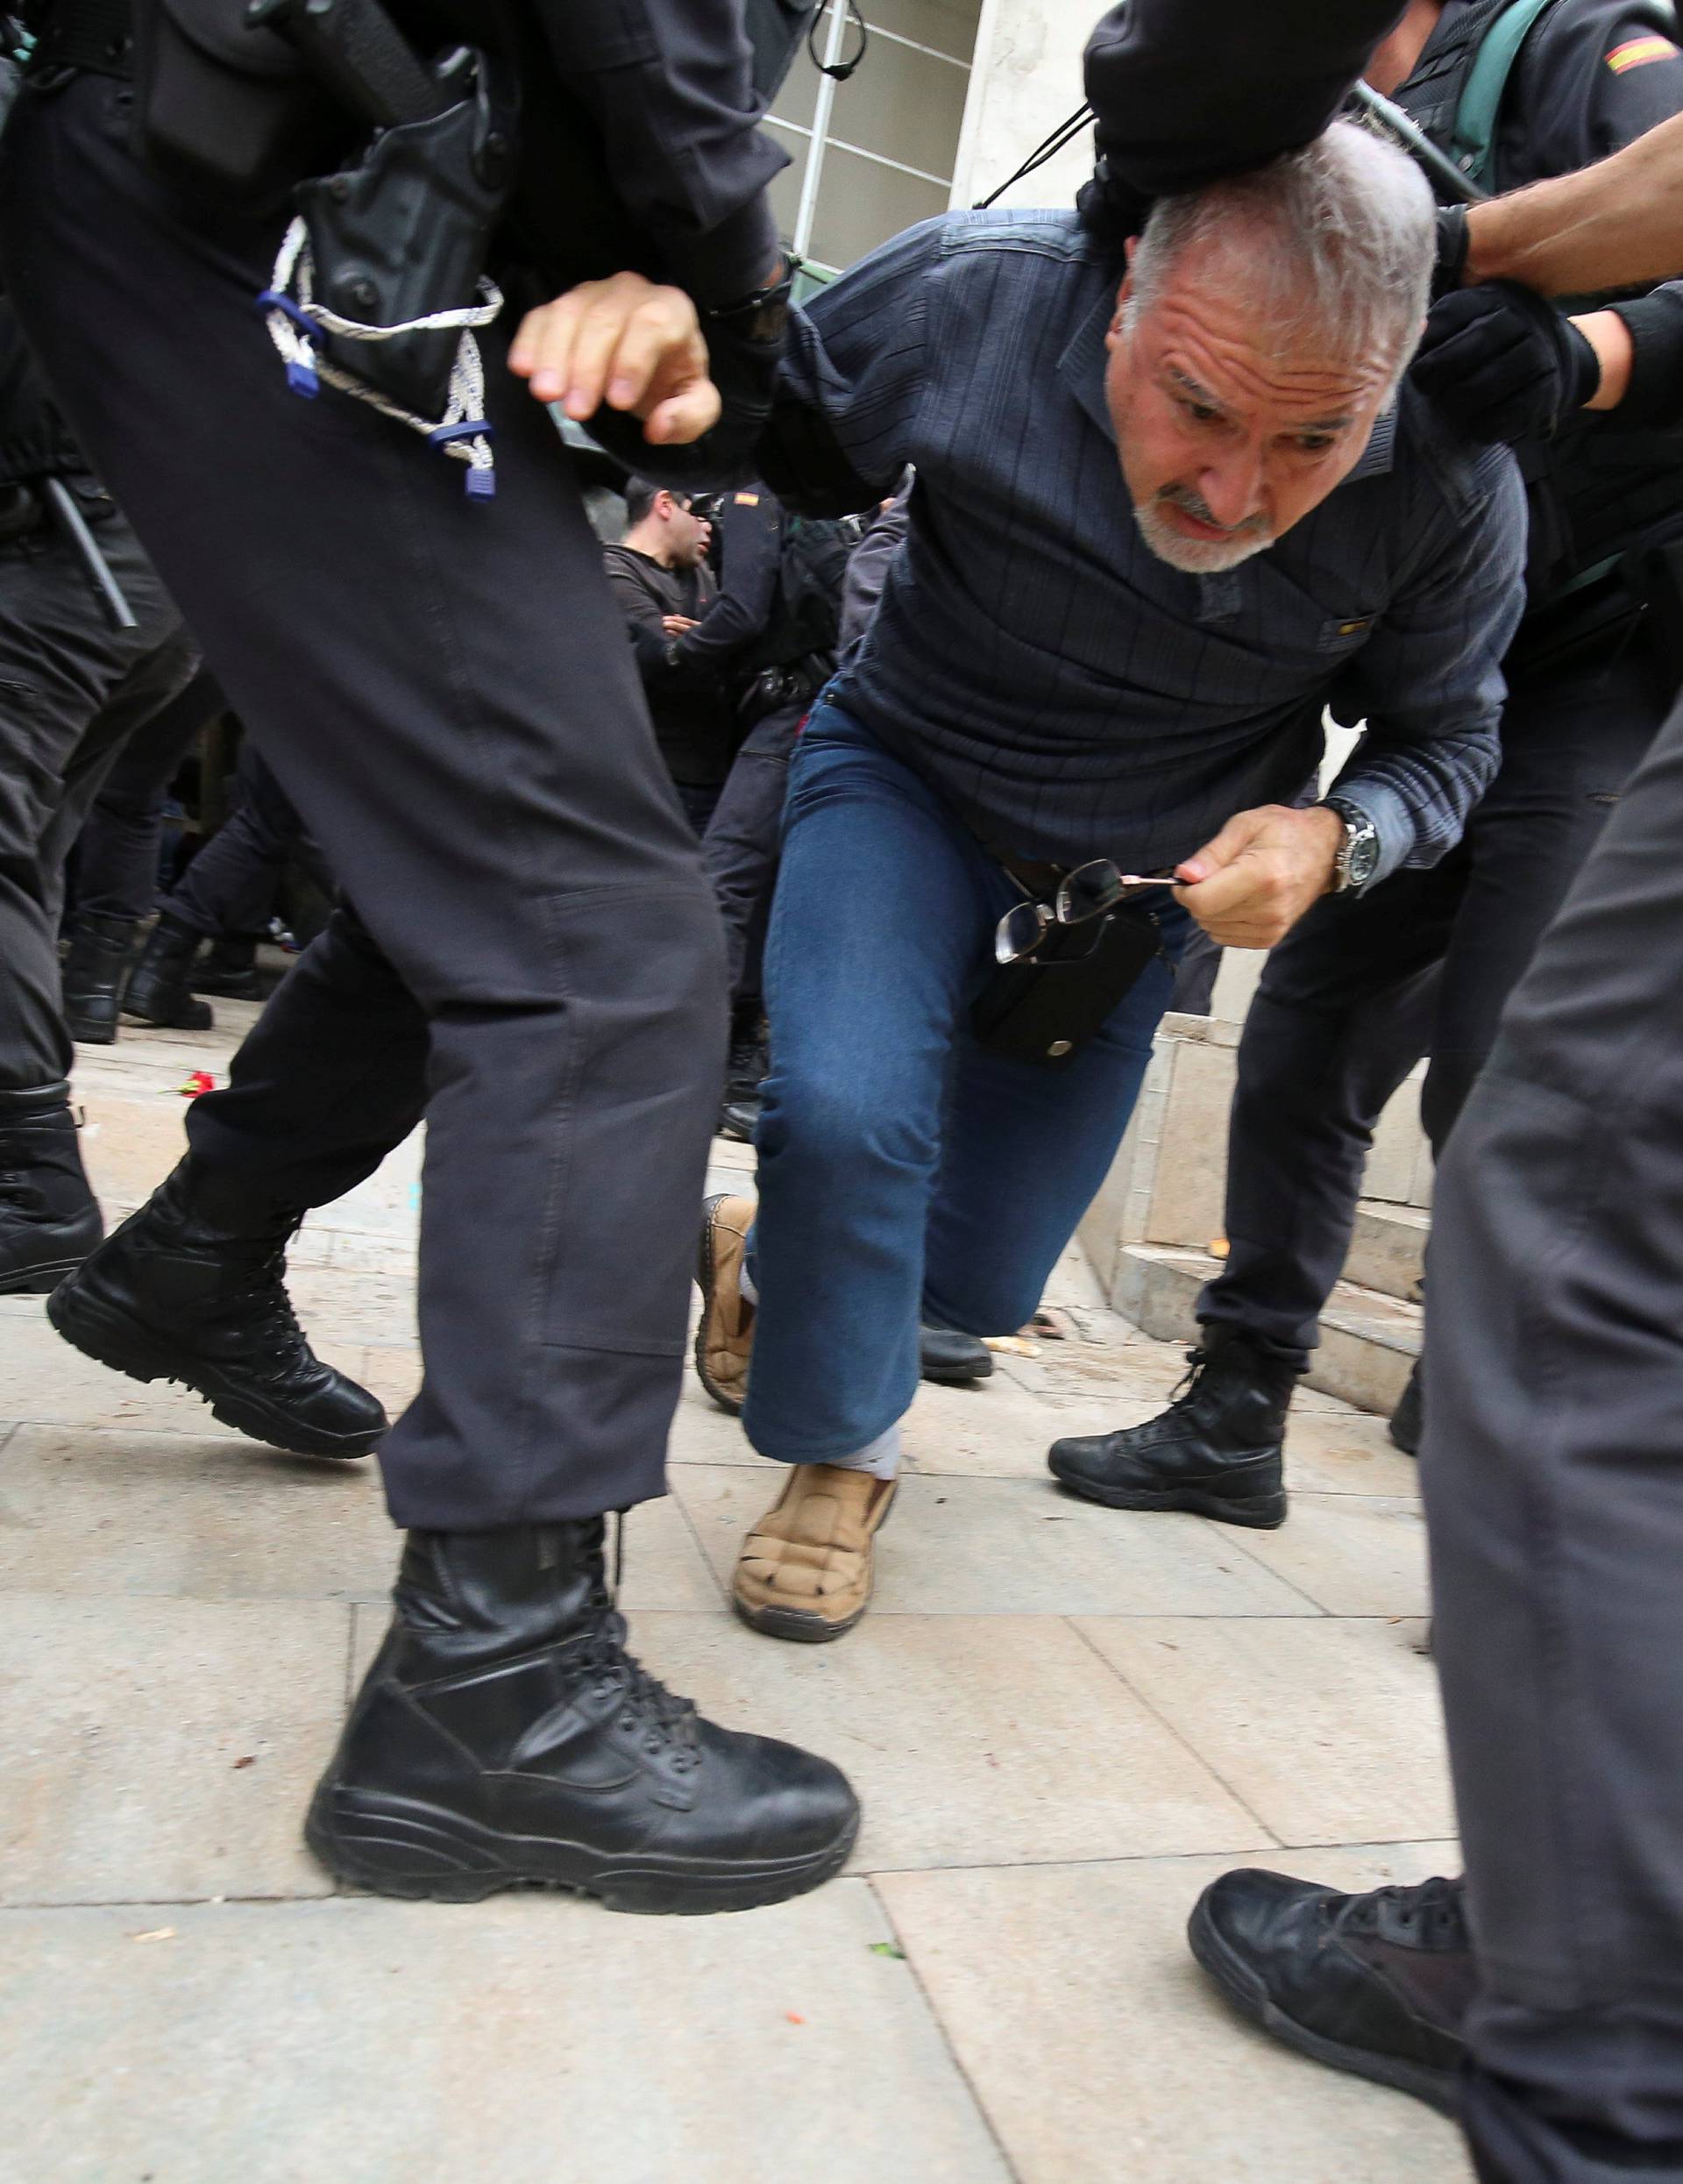 Man is dragged away by officers outside polling station for Catalonia referendum in Sant Julia de Ramis